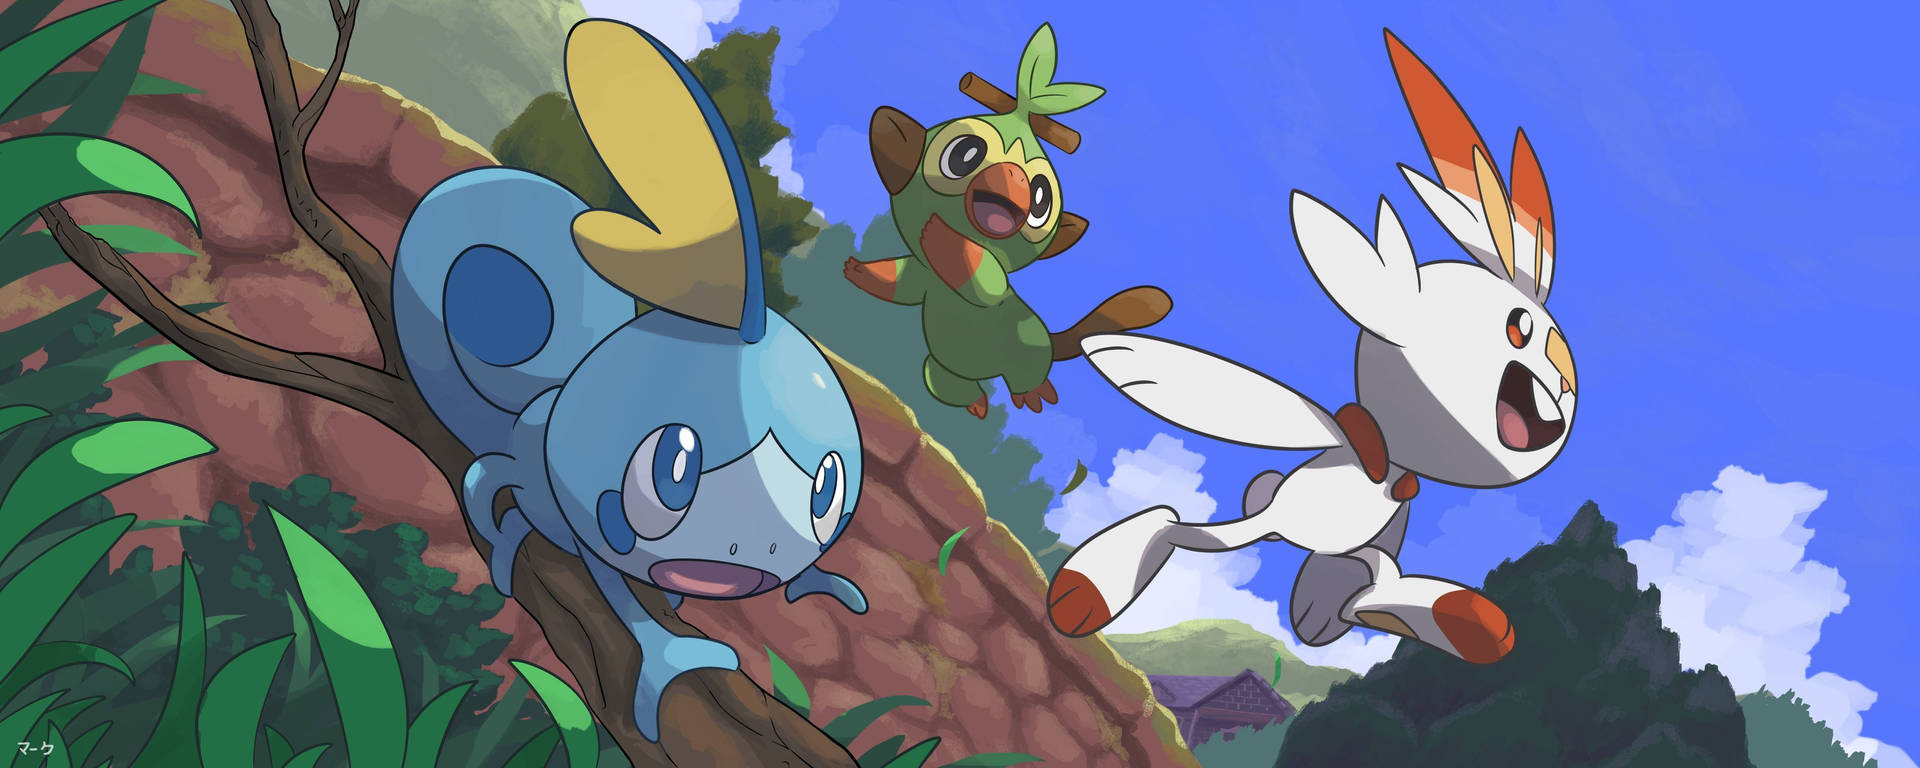 Widescreen Pokemon Sword And Shield Anime Background